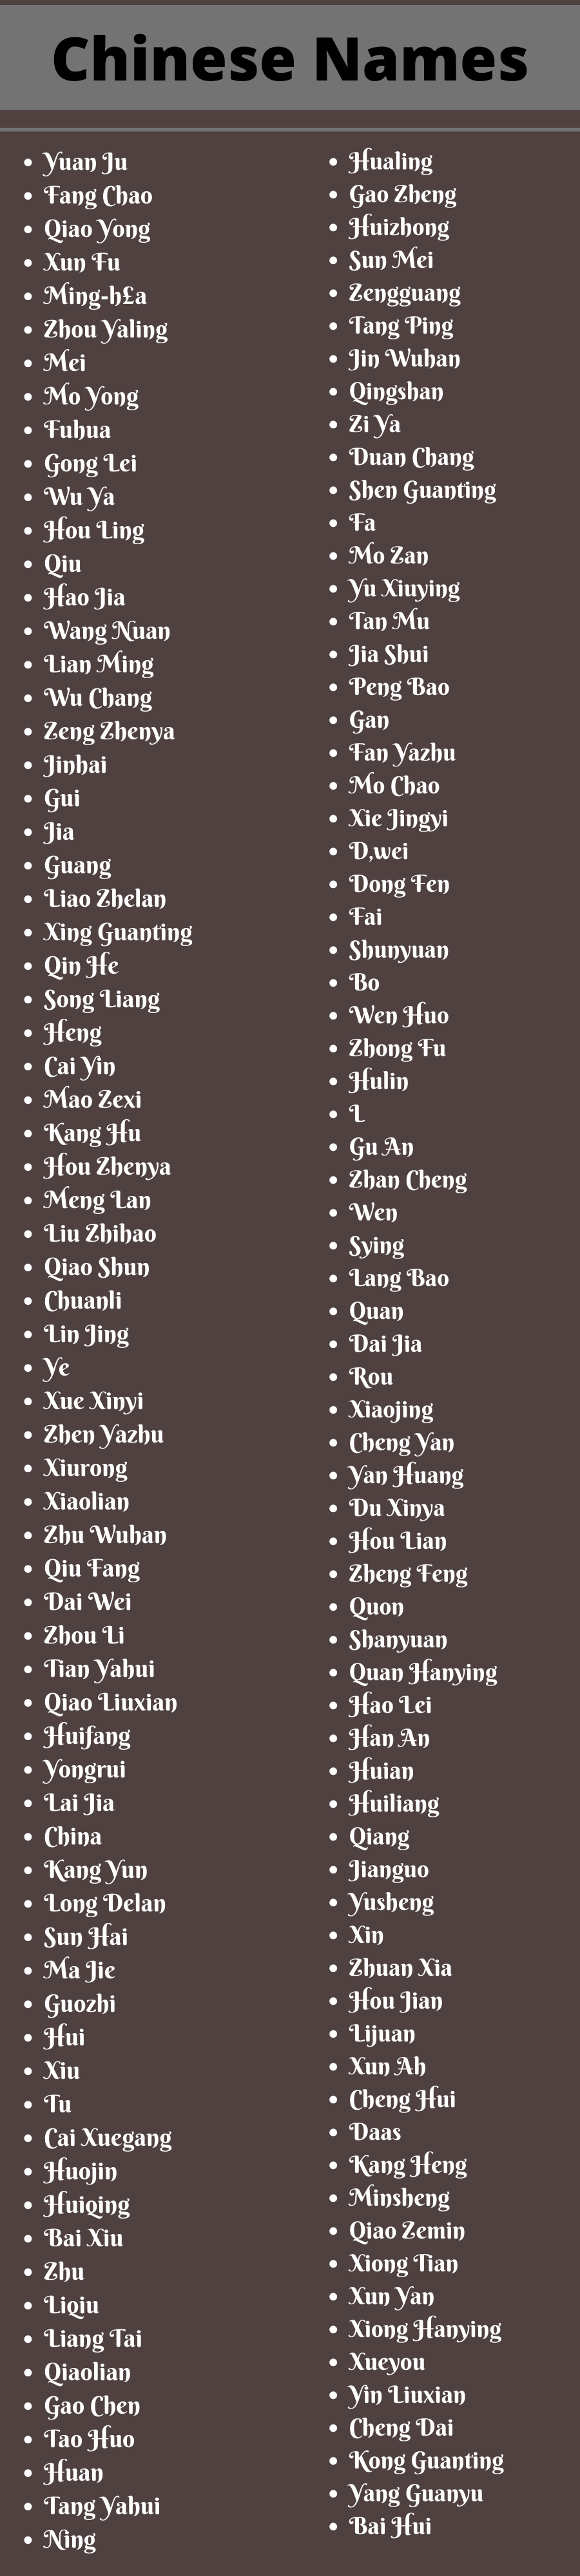 Chinese Names: 400+ Cool Chinese Names Ideas And Suggestions